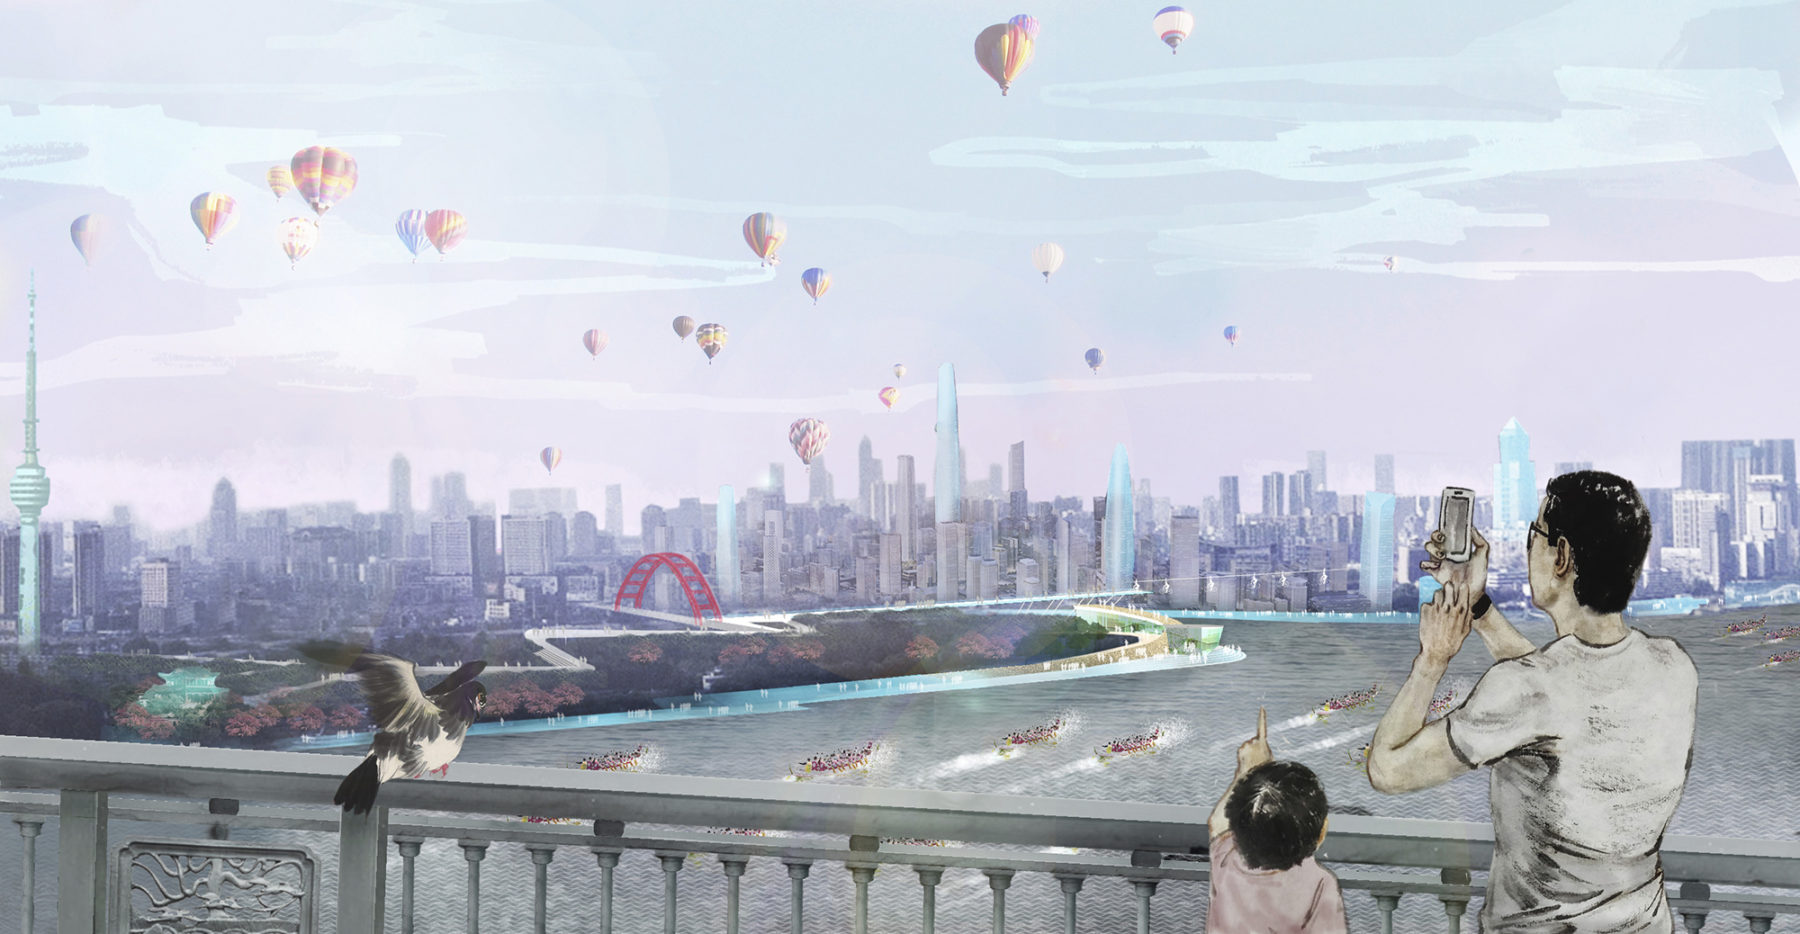 Rendering of river with umbrellas rising